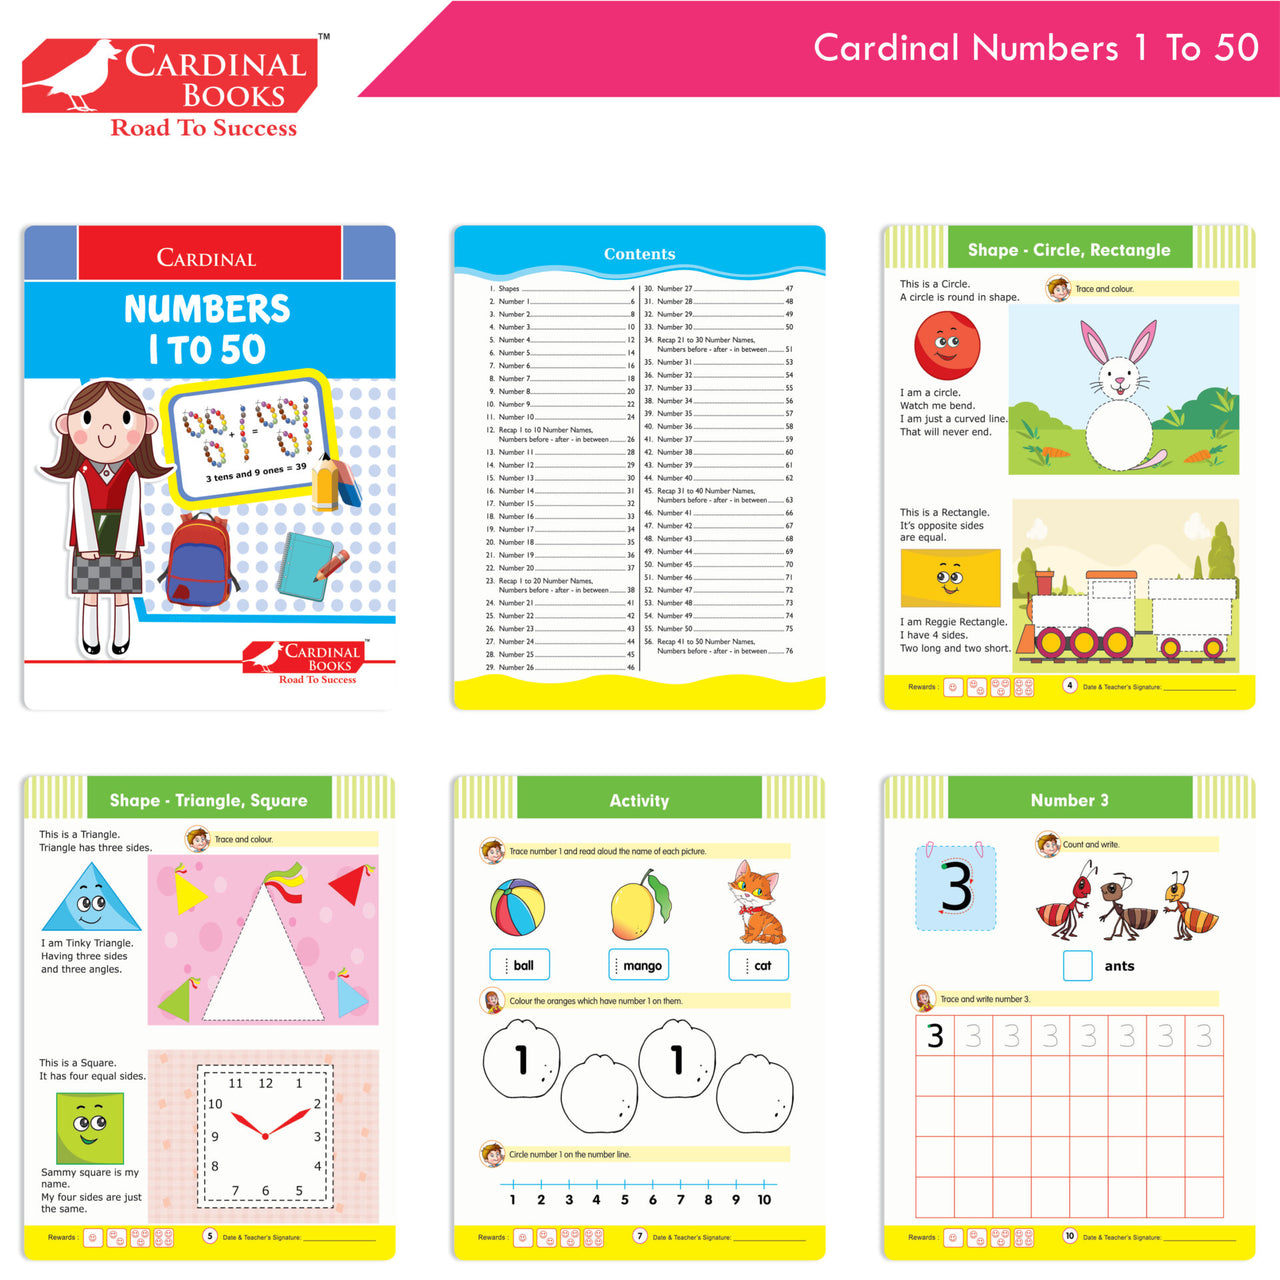 Cardinal Fun Learning Junior KG Activity Books Set of 6|Number| Rhymes & Story| Phonic| English & Maths Skill| Colouring Book For Kids Ages 4-5 Years - Distacart